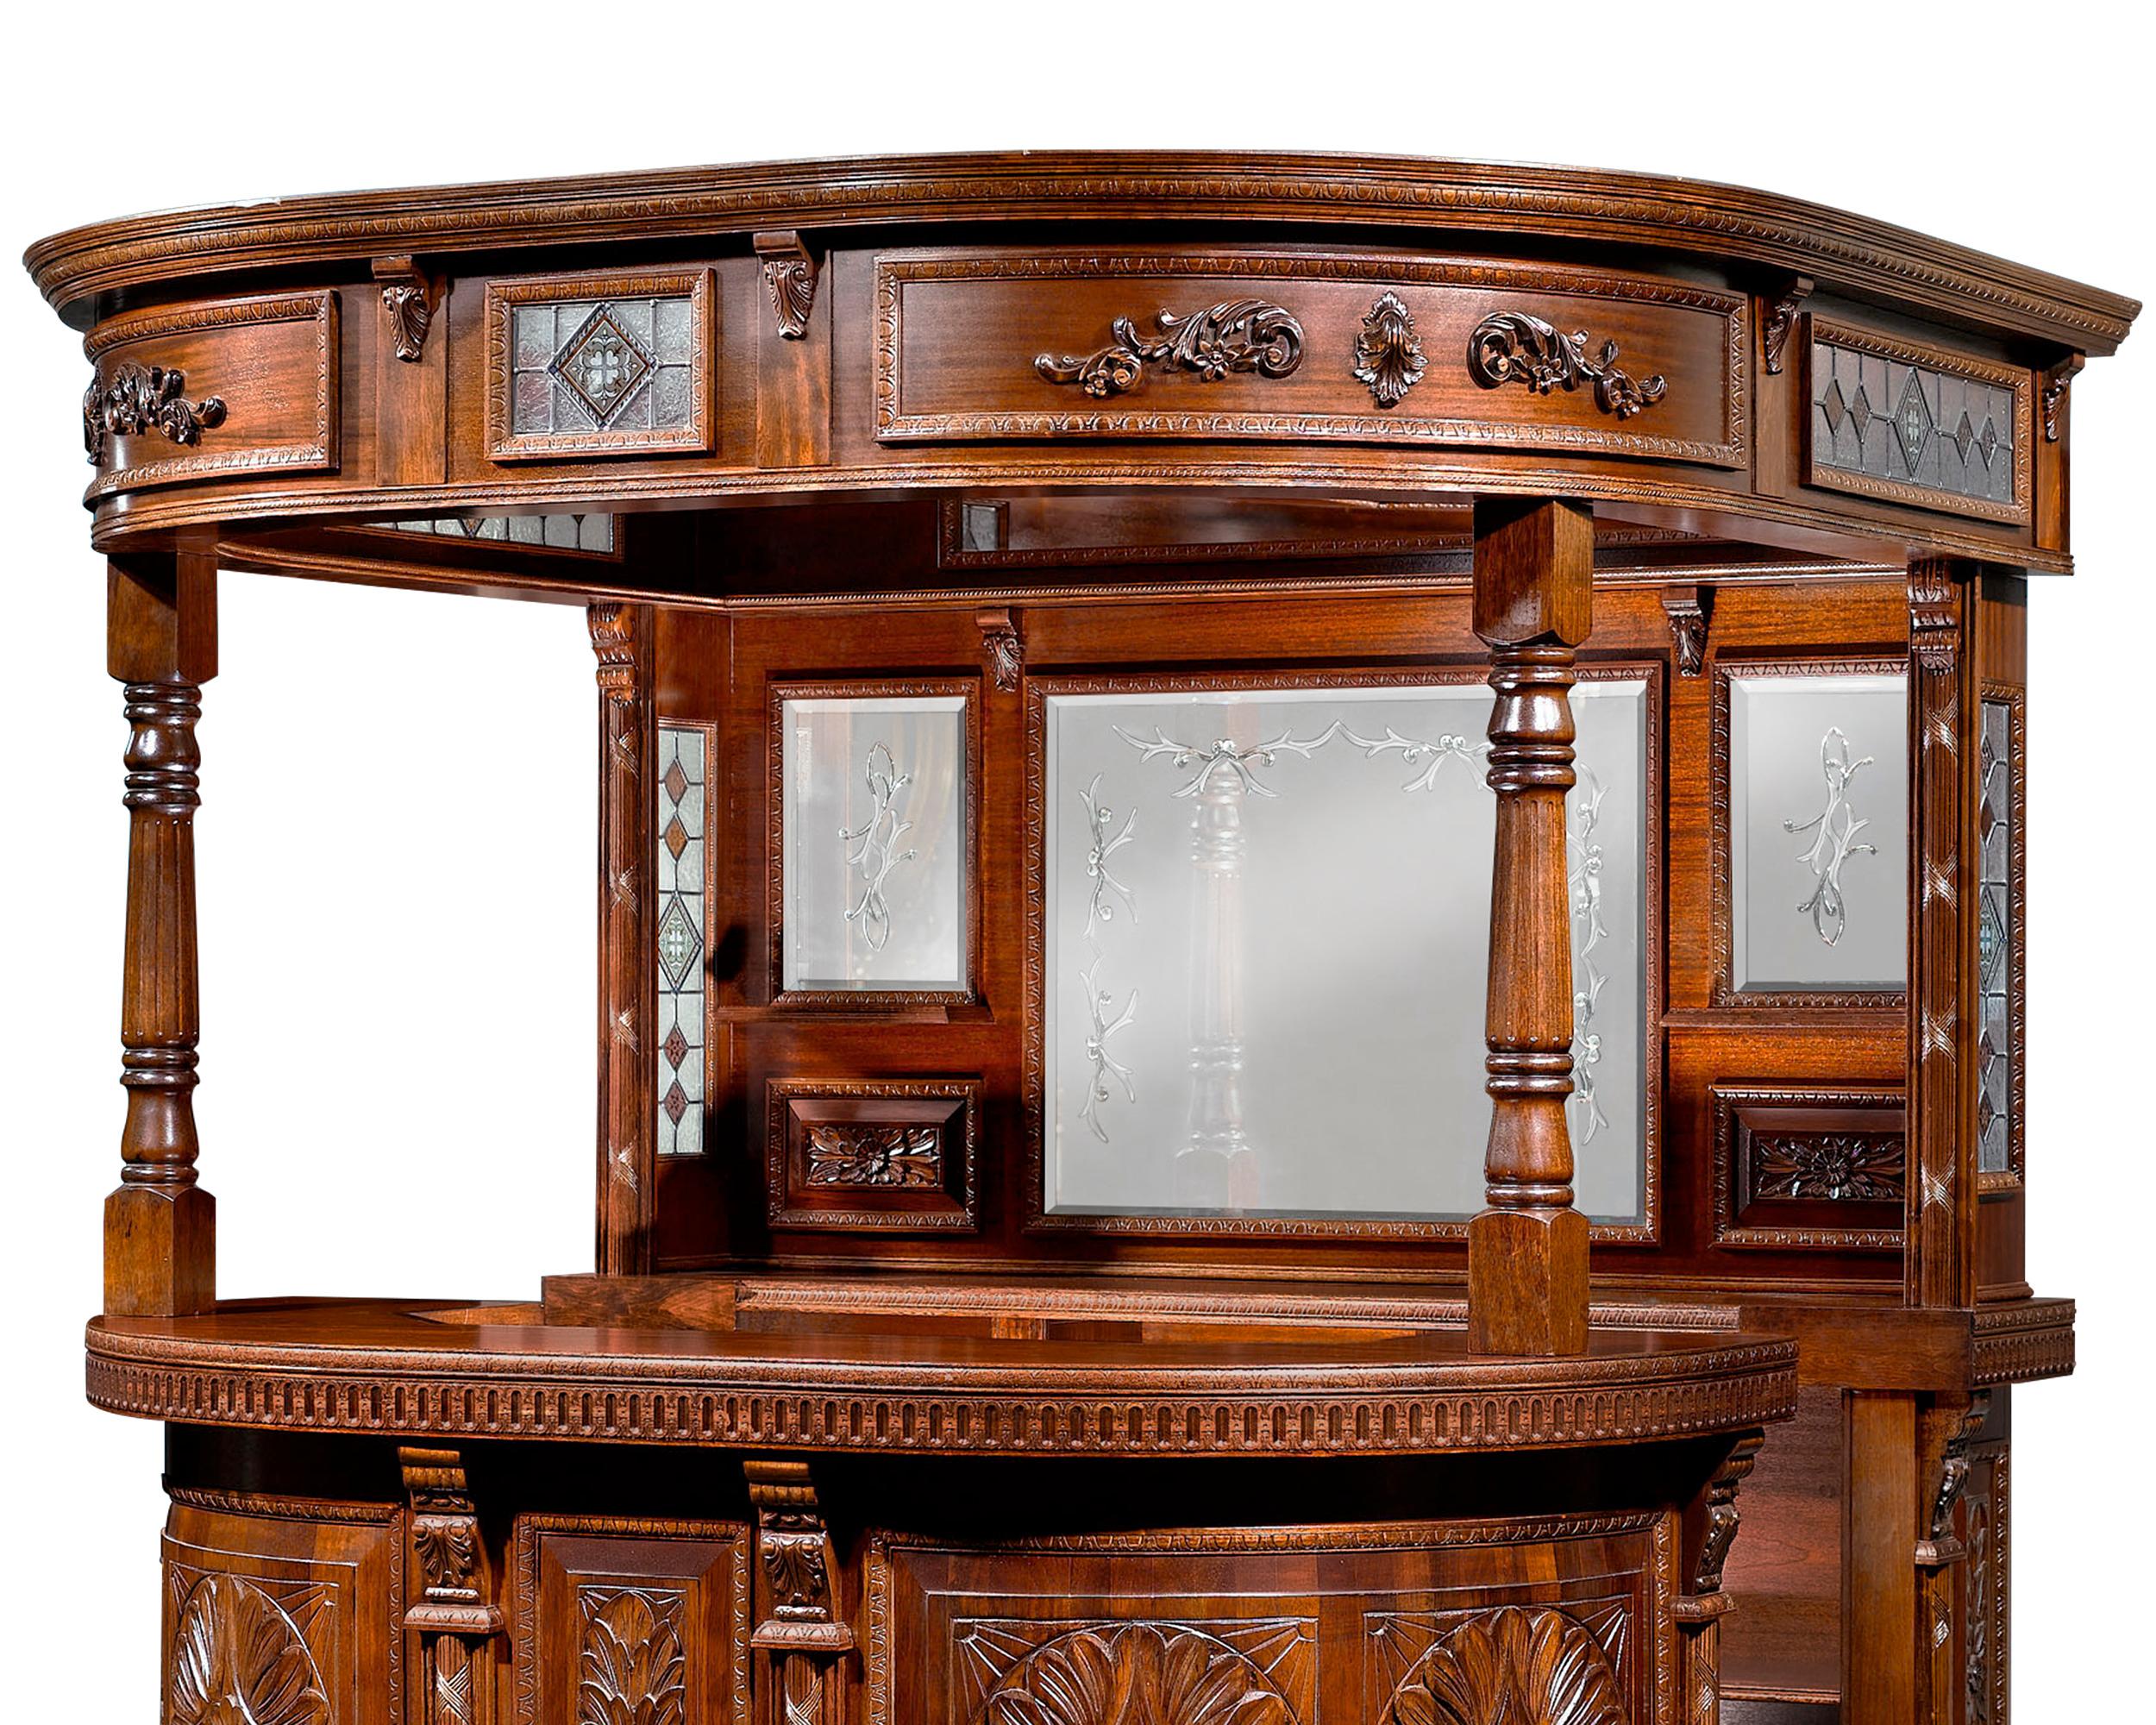 This exceptional mahogany canopied walk-through bar stands at over seven feet tall and possesses an airy spaciousness thanks to stained glass panels of superb quality and craftsmanship Placed in the canopy and on the sides of the bar, the colorful